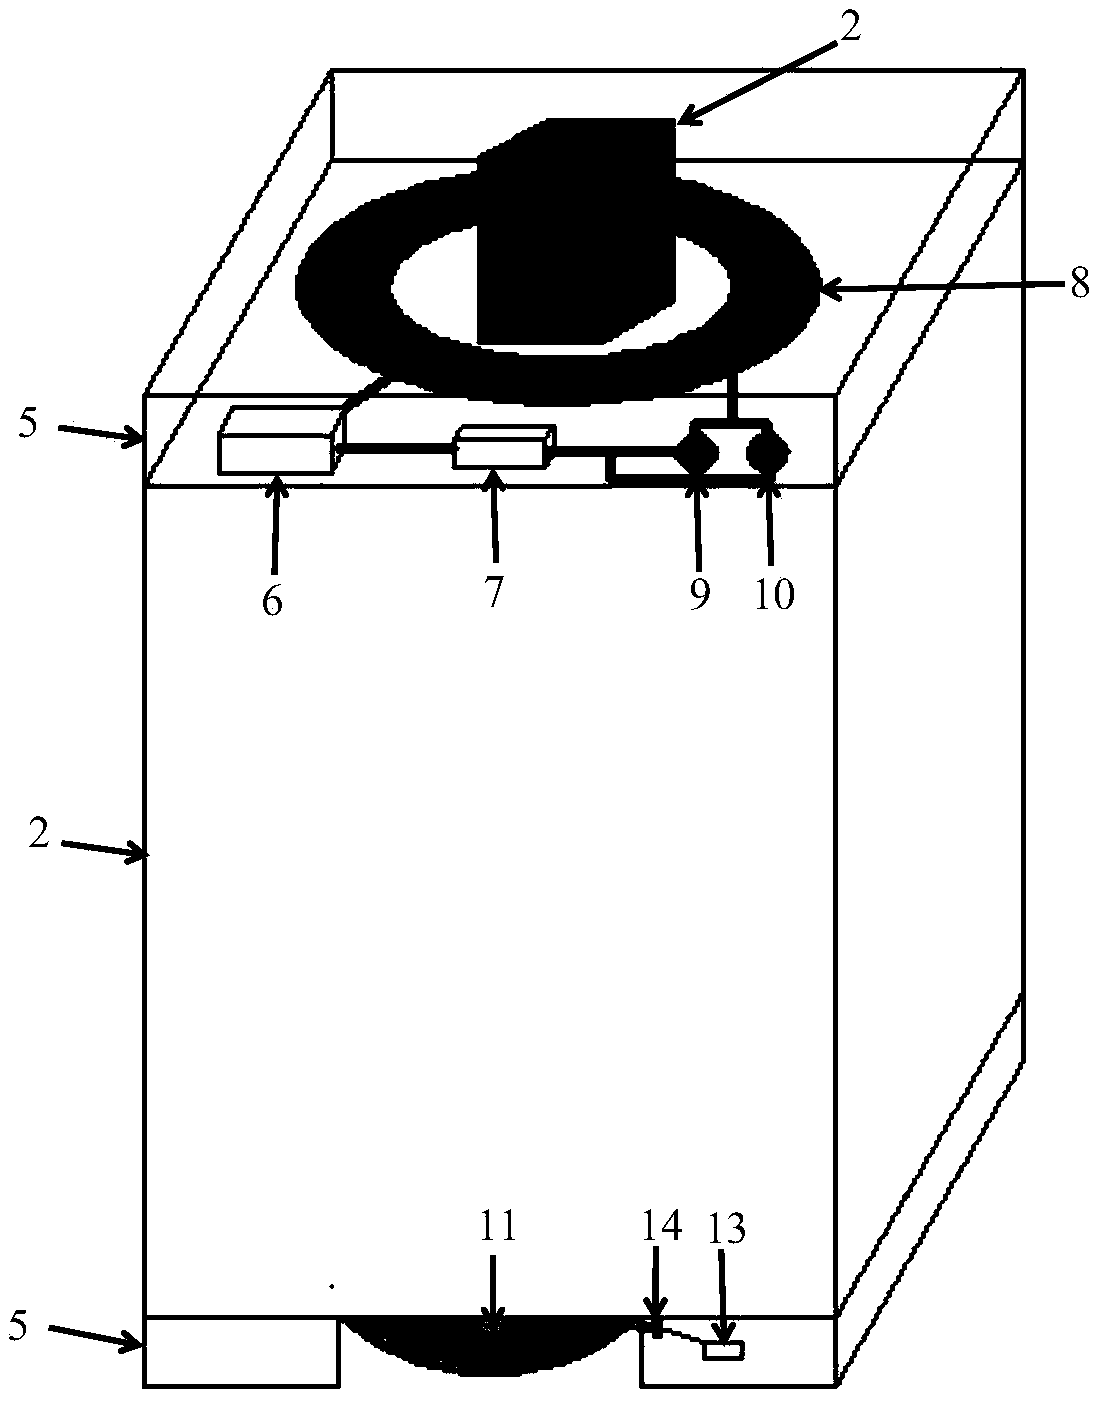 Cage anti-falling speed reduction buffer device